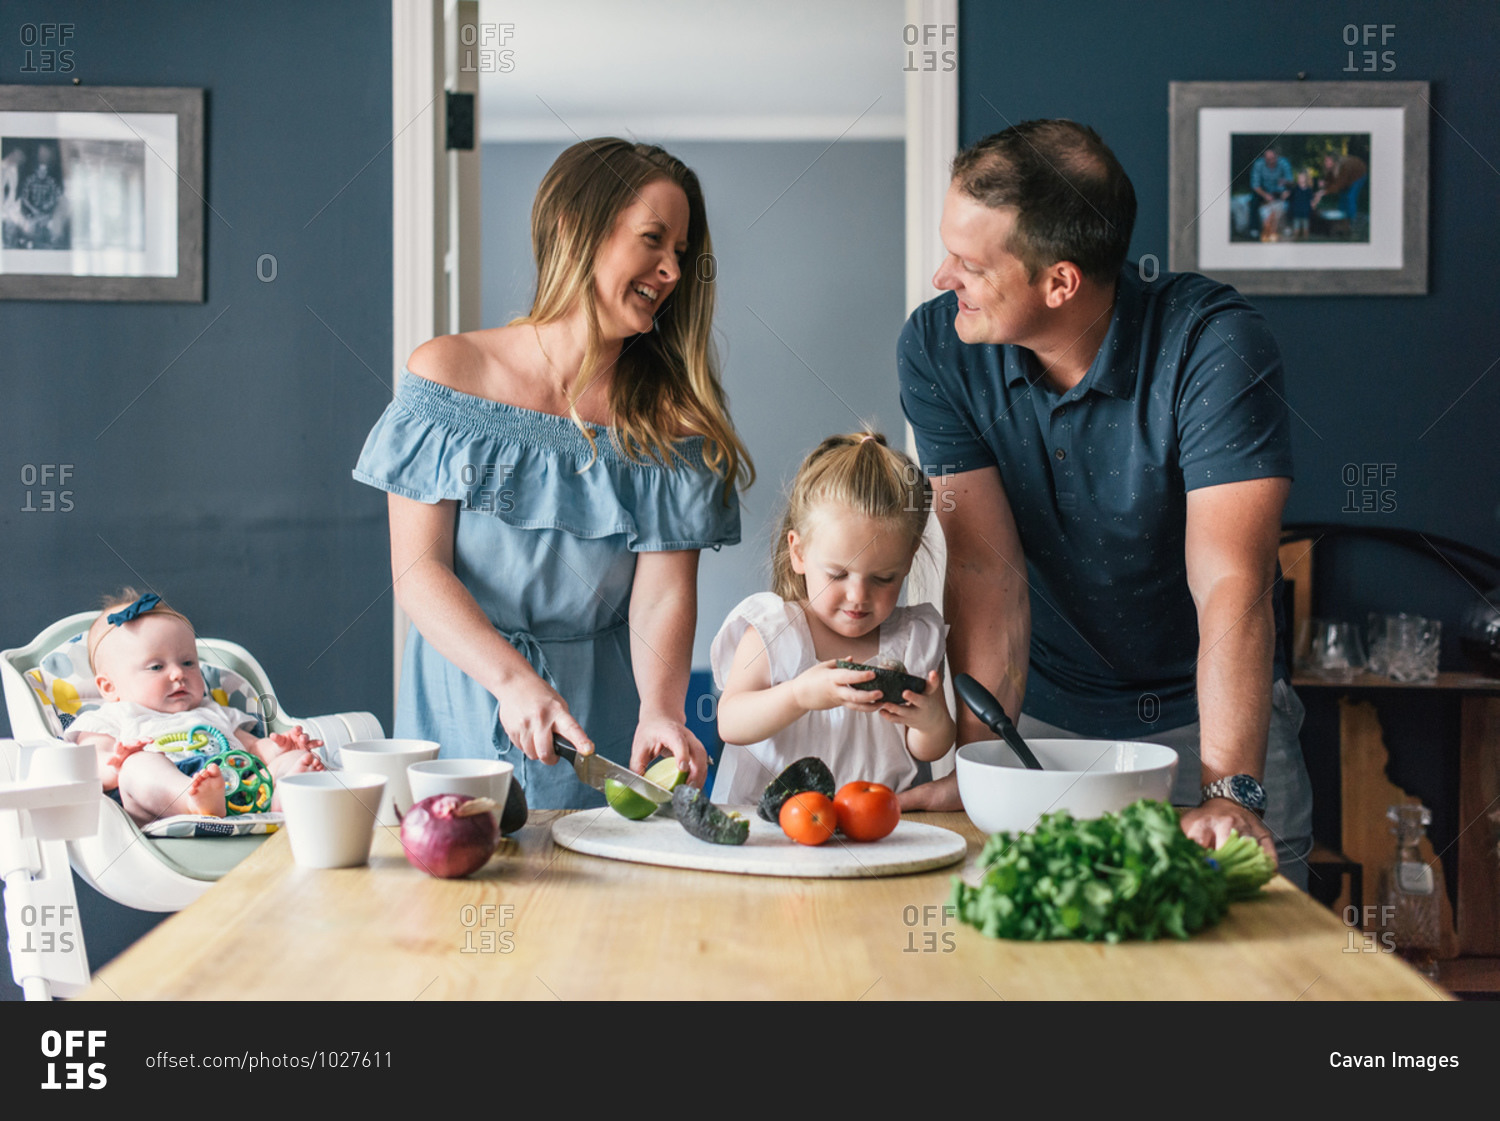 Family with young children laughing while making healthy food